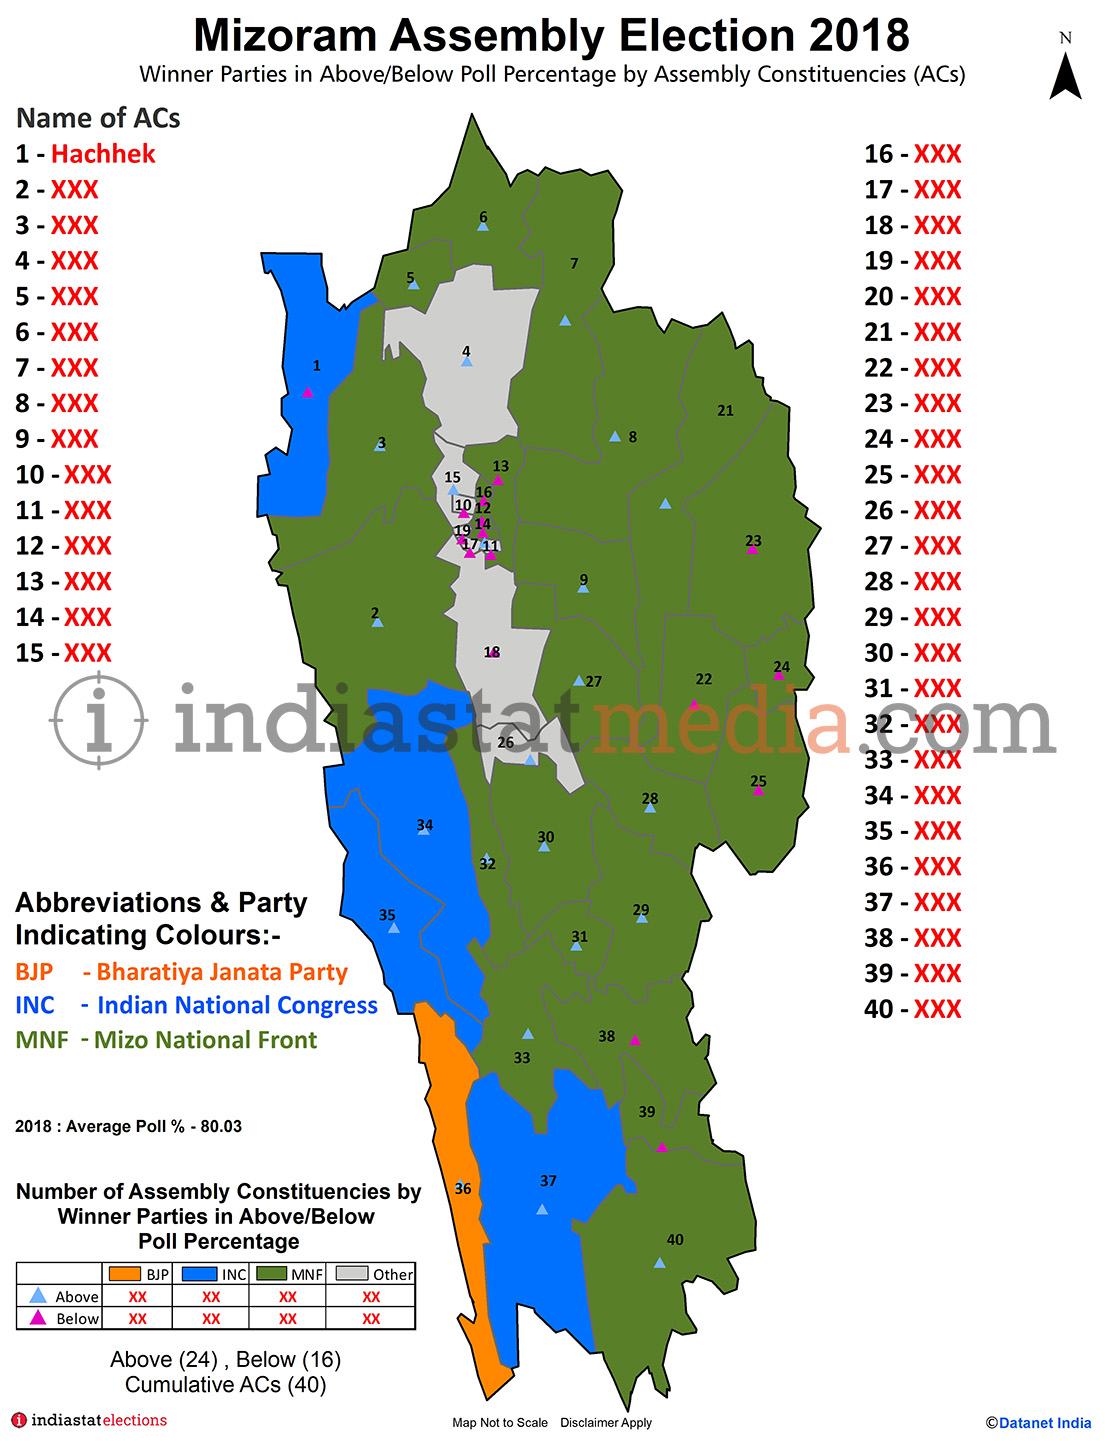 Winner Parties in Above and Below Poll Percentage by Constituencies in Mizoram (Assembly Election - 2018)